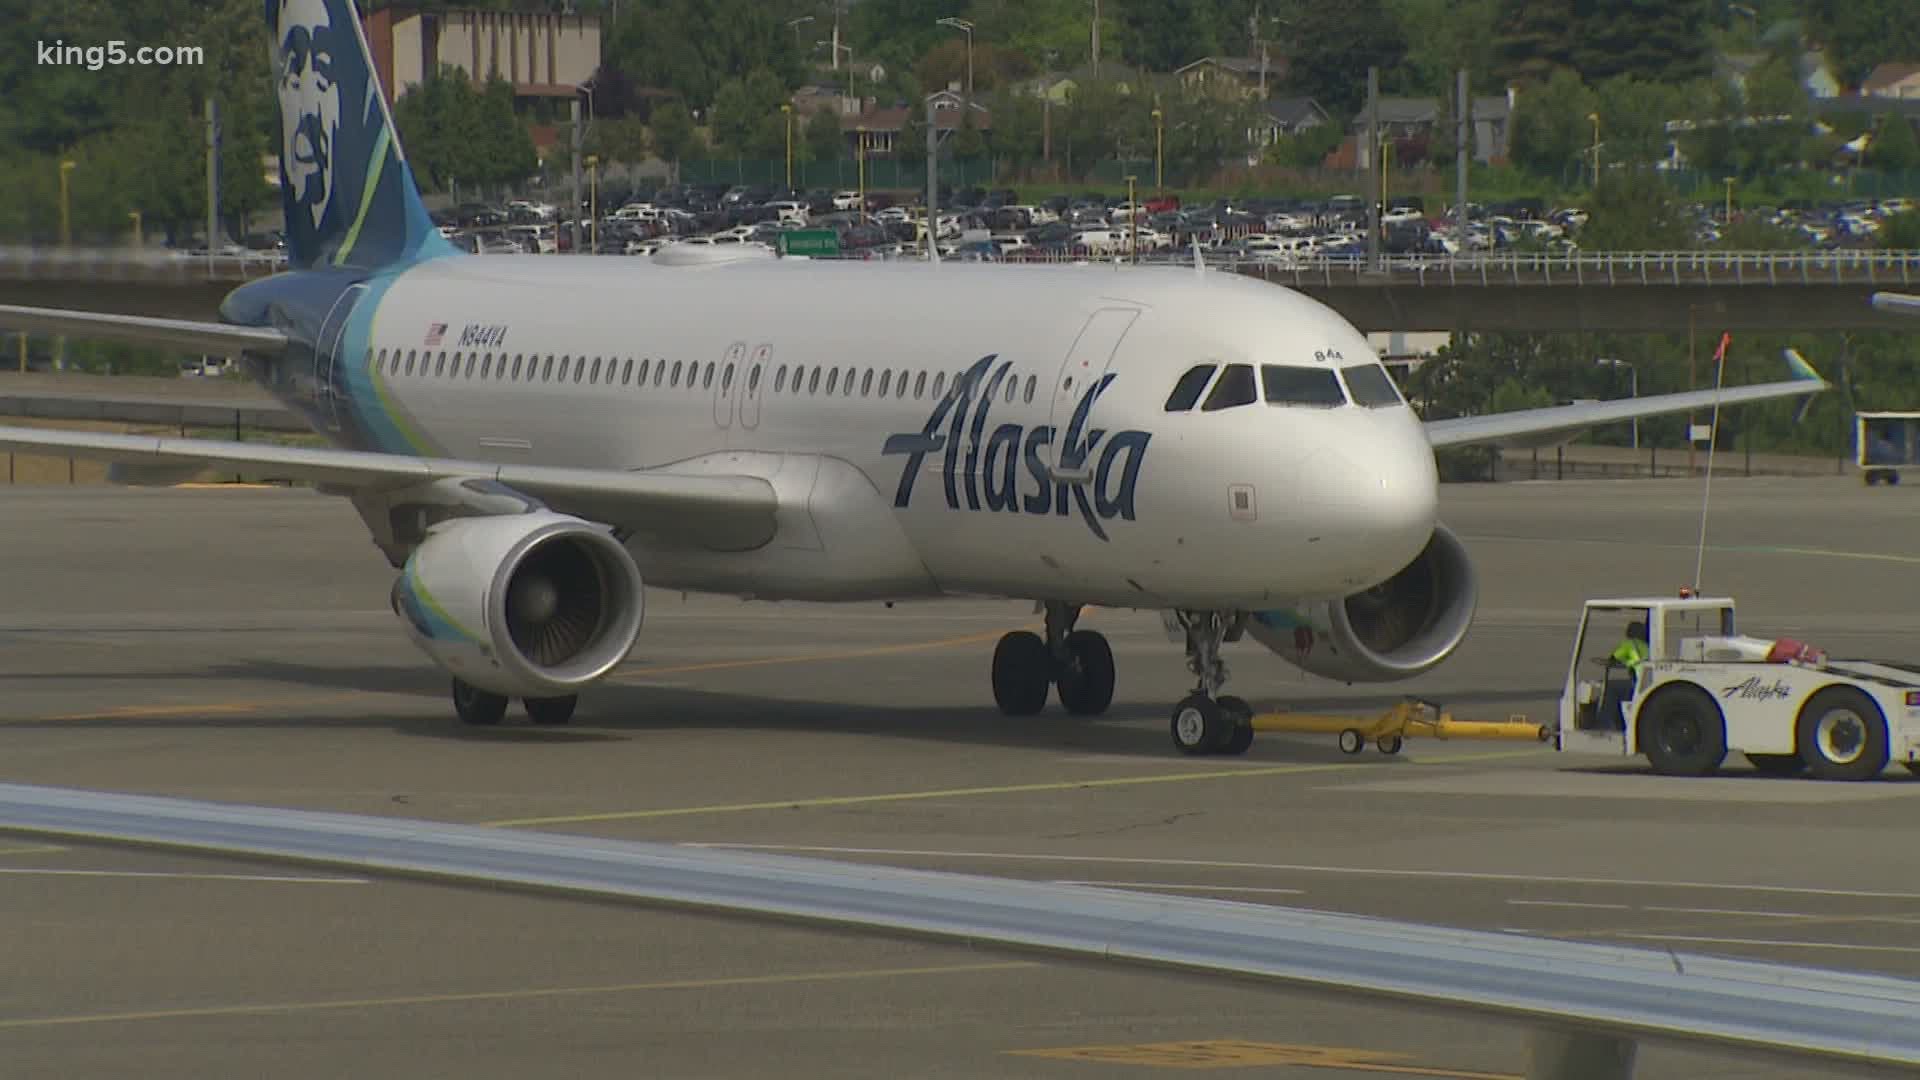 With federal aid for airlines running out and talks over an extension stalled, Alaska Airlines said it will soon begin to furlough 532 employees.